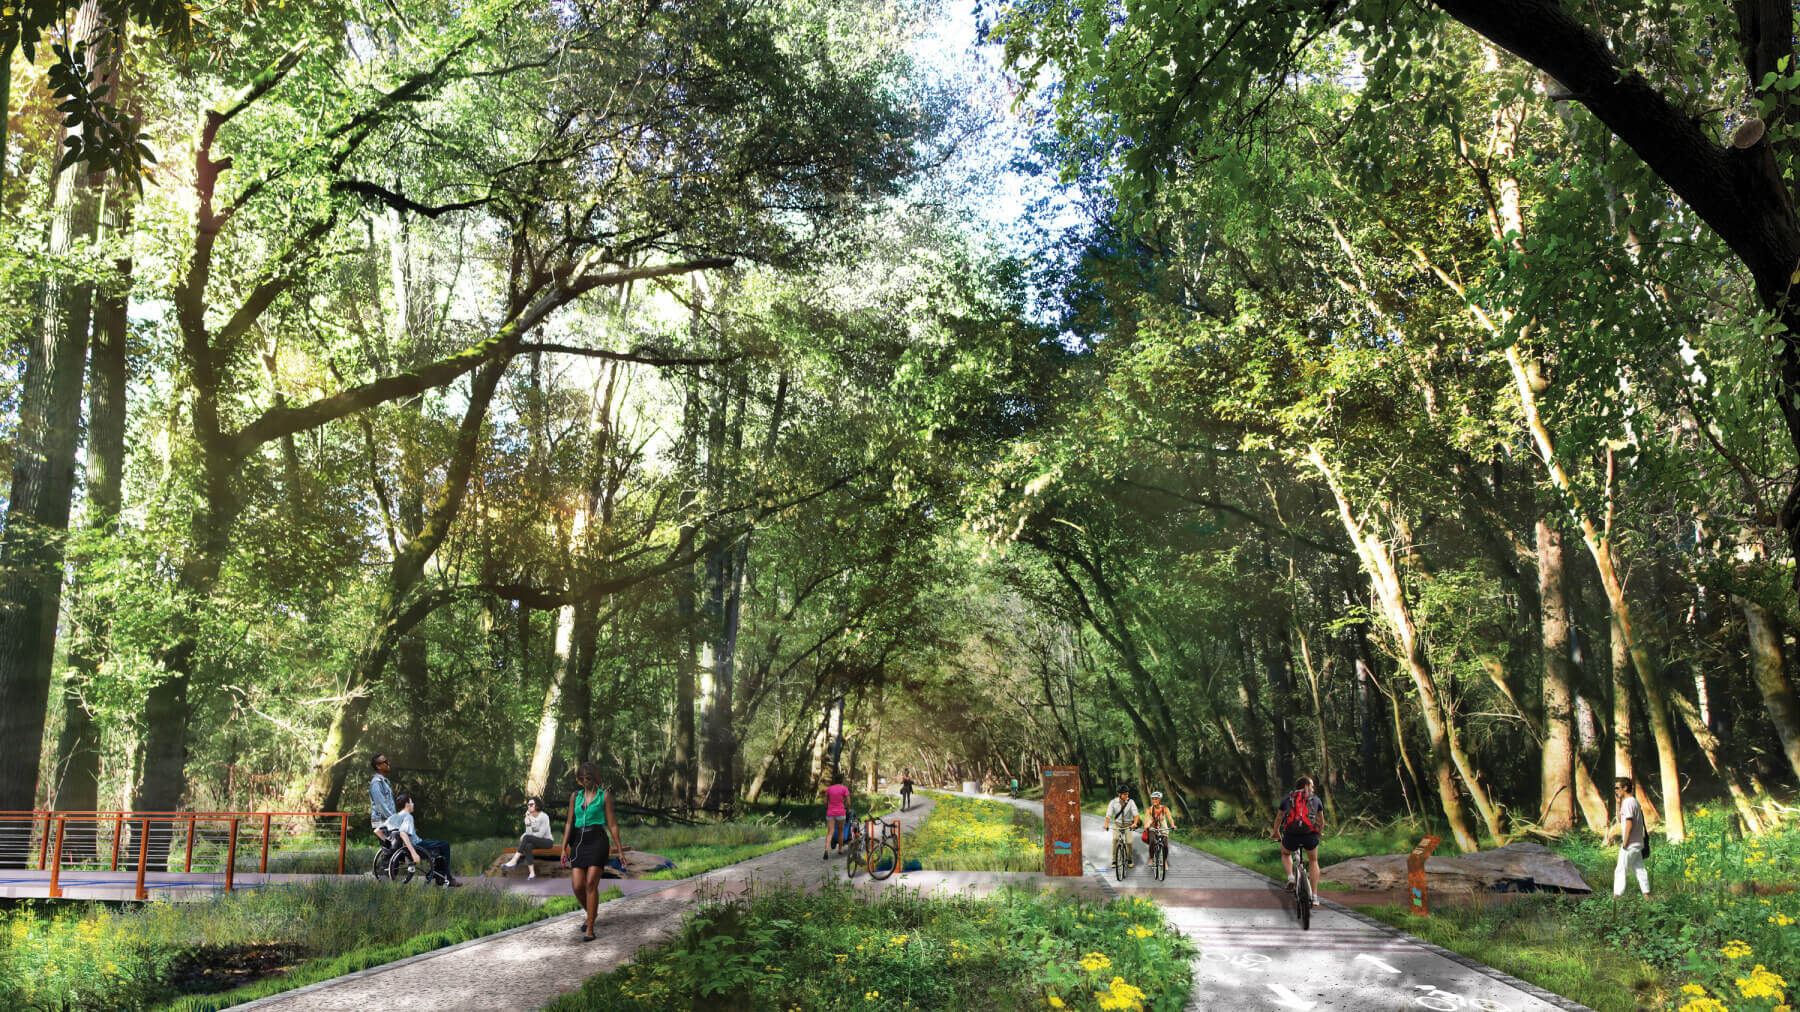 People walking and biking on the Chattahoochee RiverLands trail in a rendering